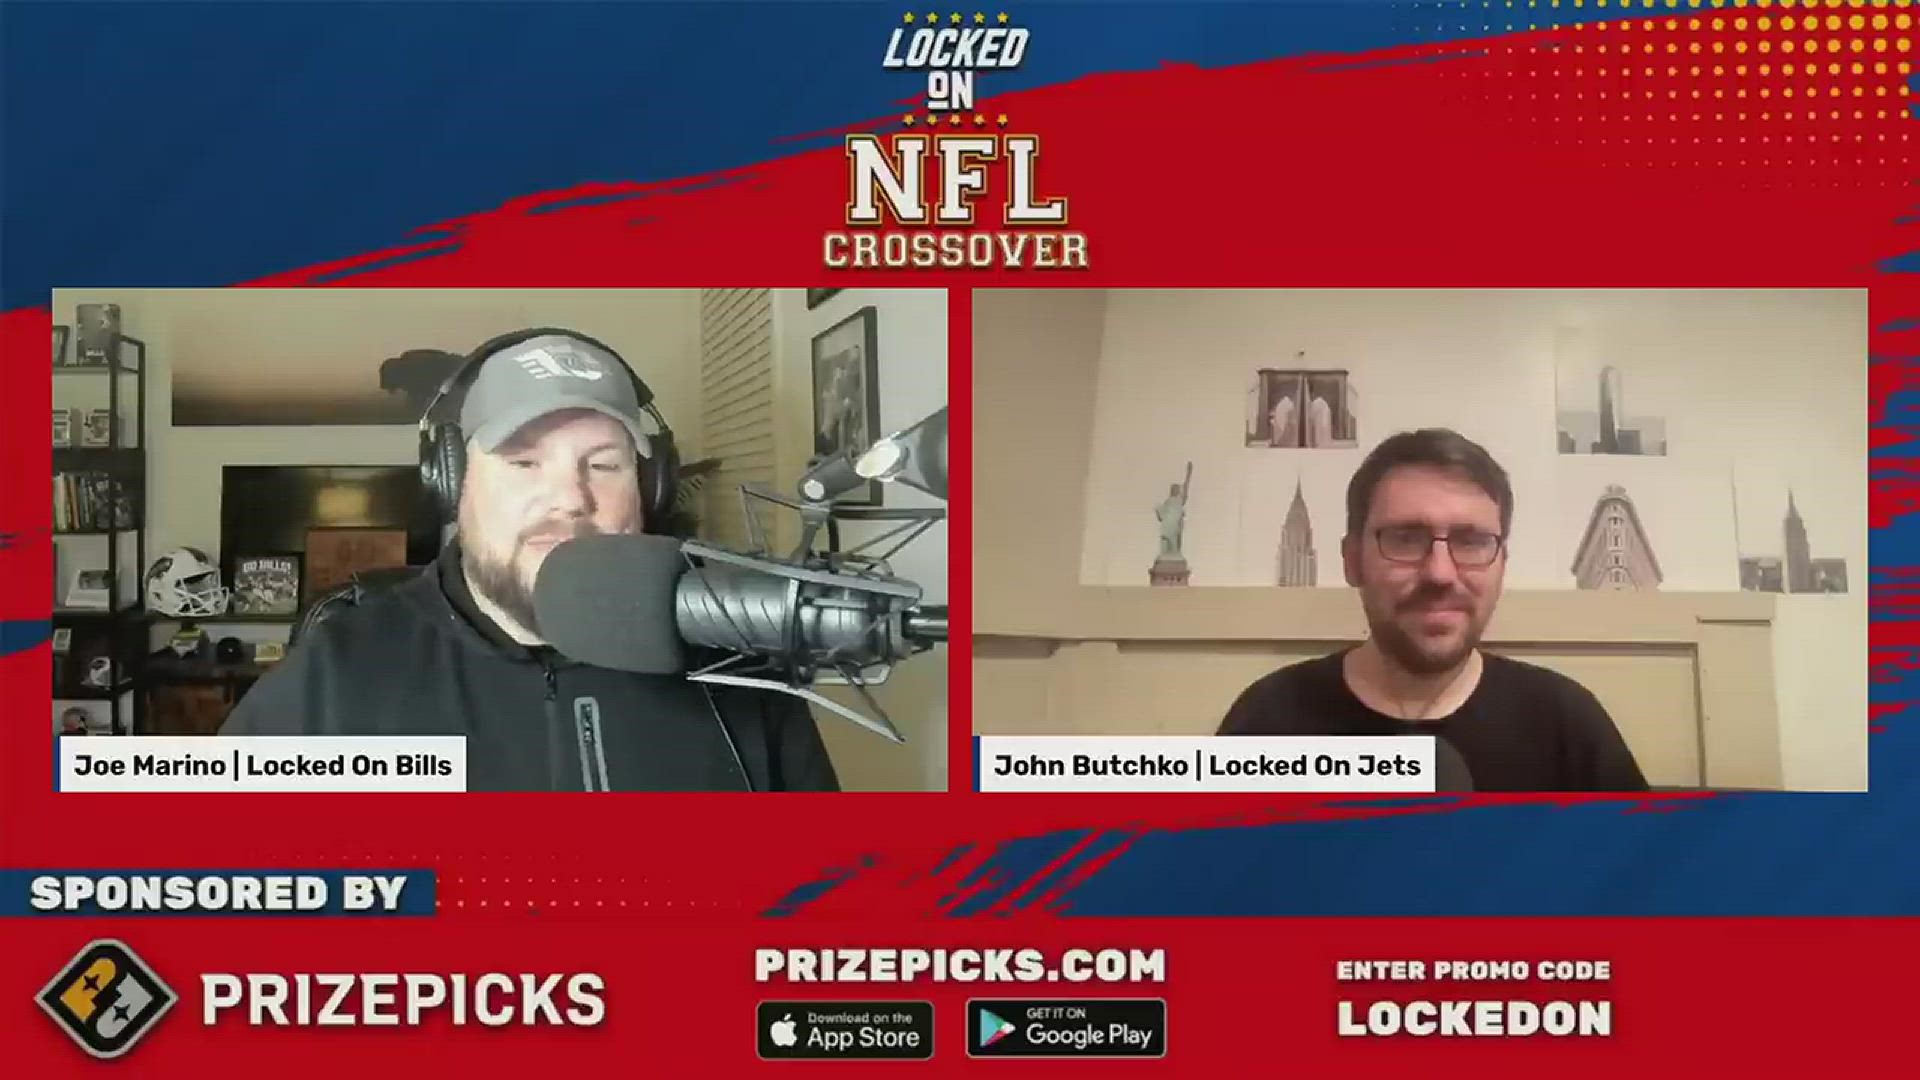 On today's podcast, Joe Marino is joined by John Butchko of Locked On Jets to breakdown the biggest matchups and storylines for Sunday and offer game predictions.